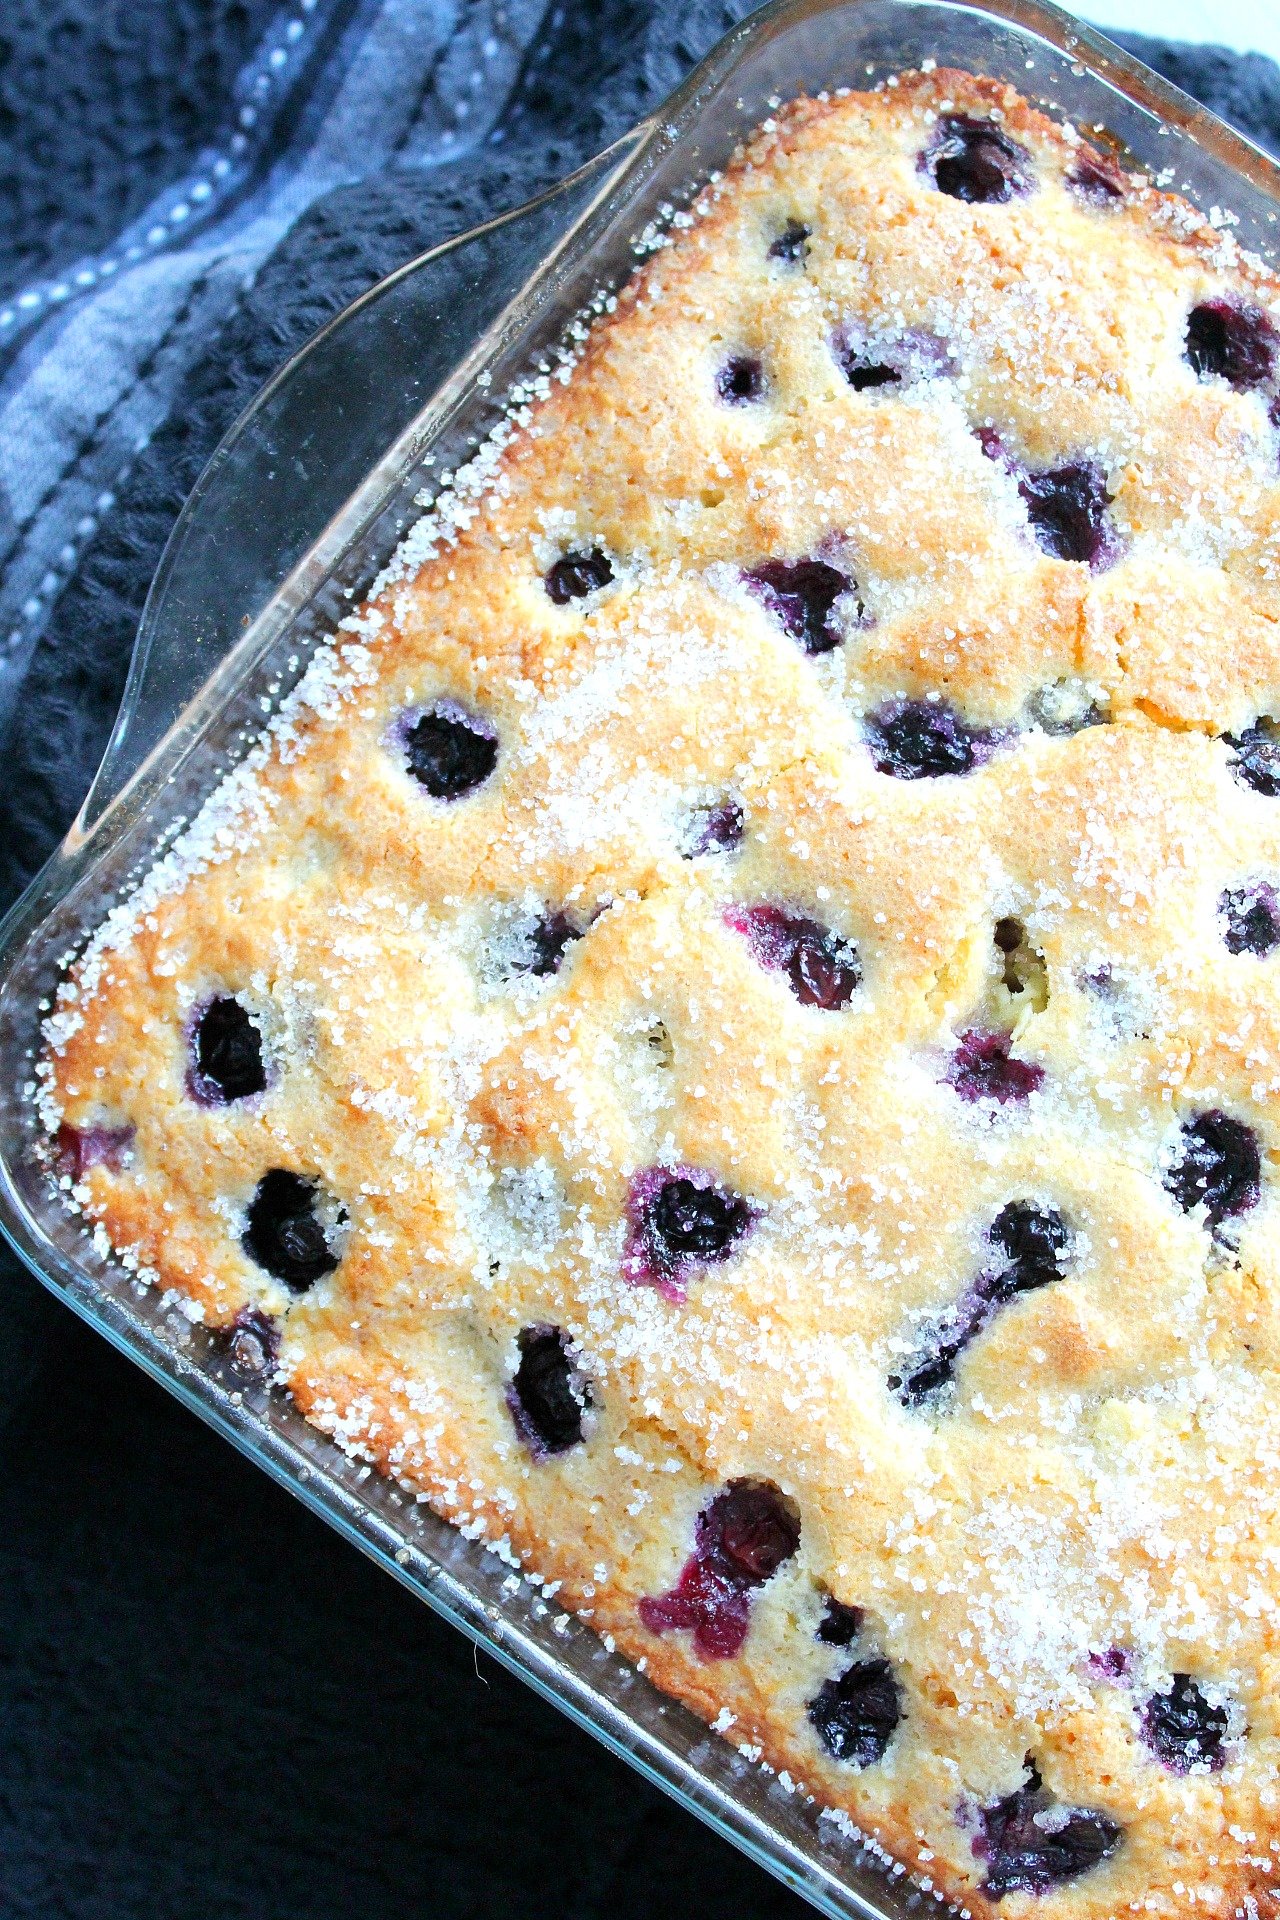 Bisquick Blueberry Coffee Cake Recipe - By Kelsey Smith